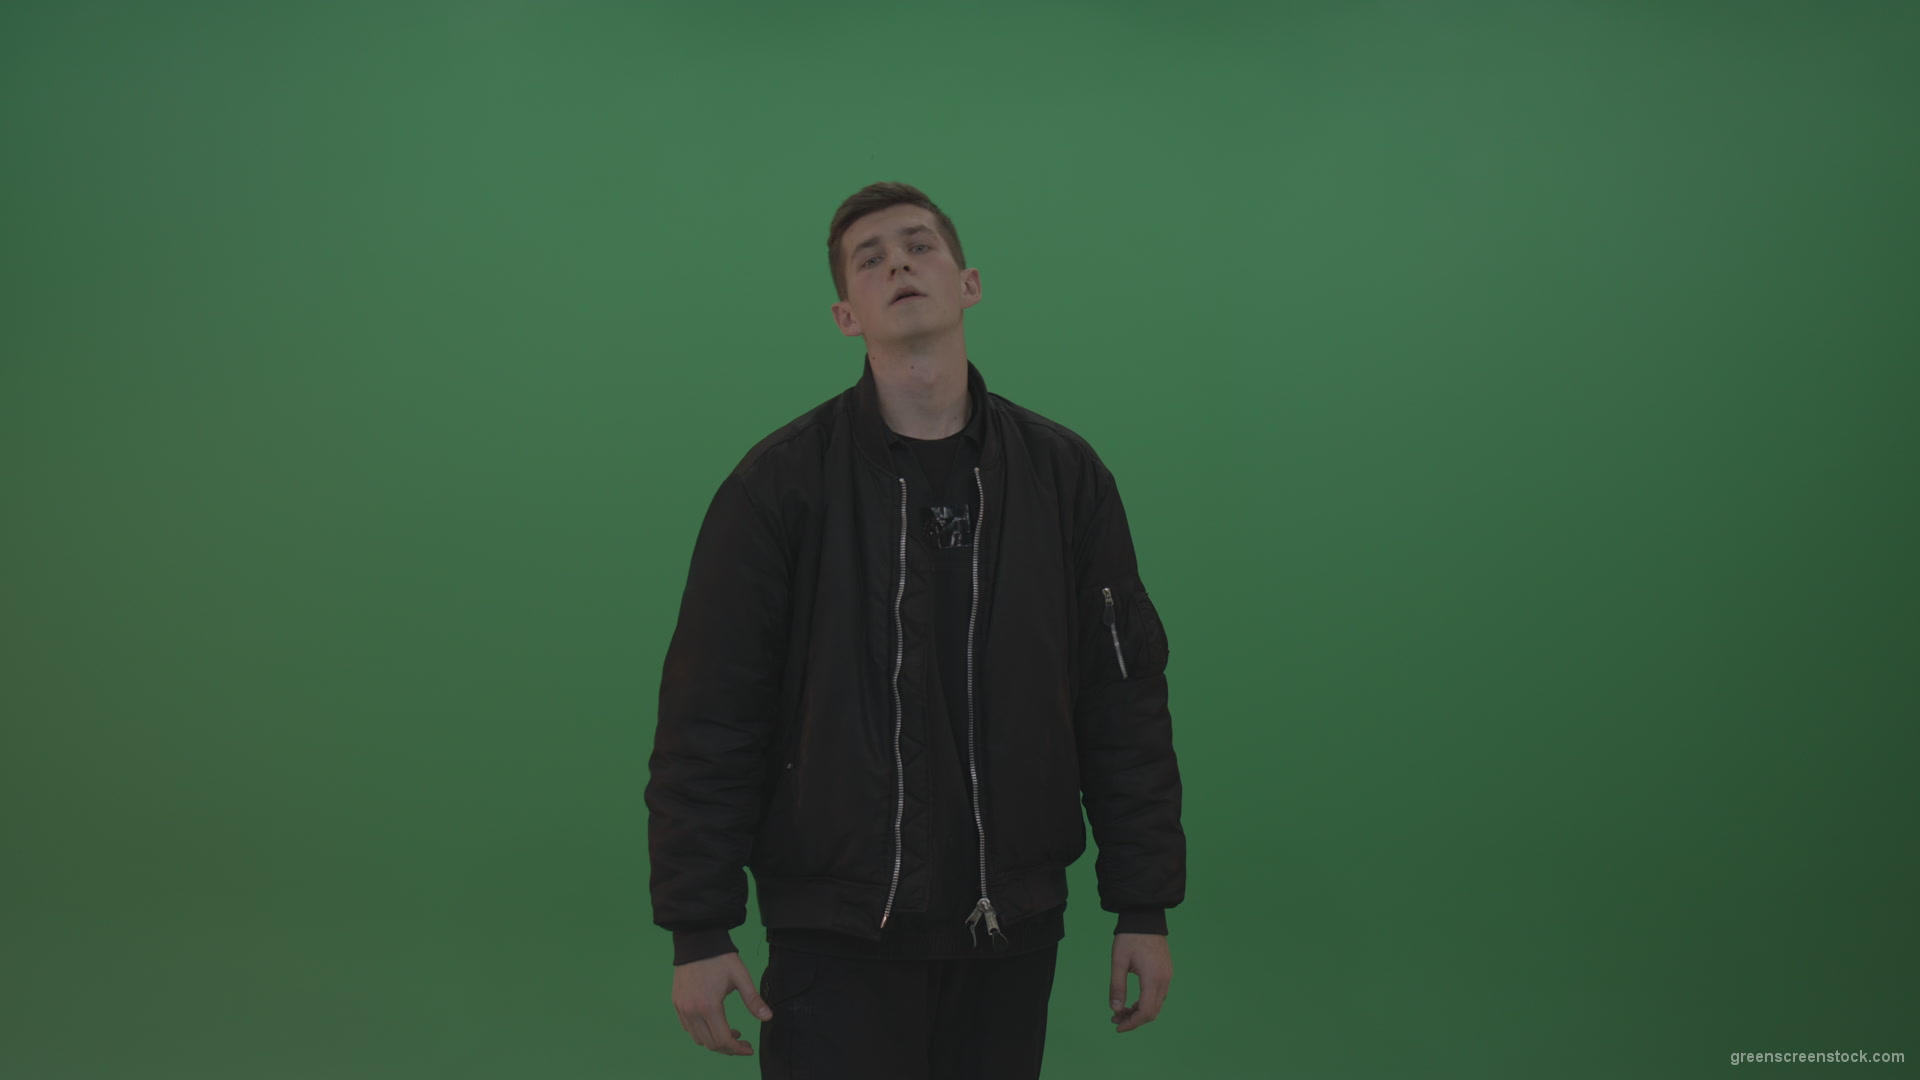 Boy-in-black-wear-displays-the-kill-sign-and-two-middle-fingers-in-the-air-over-chromakey-background_001 Green Screen Stock